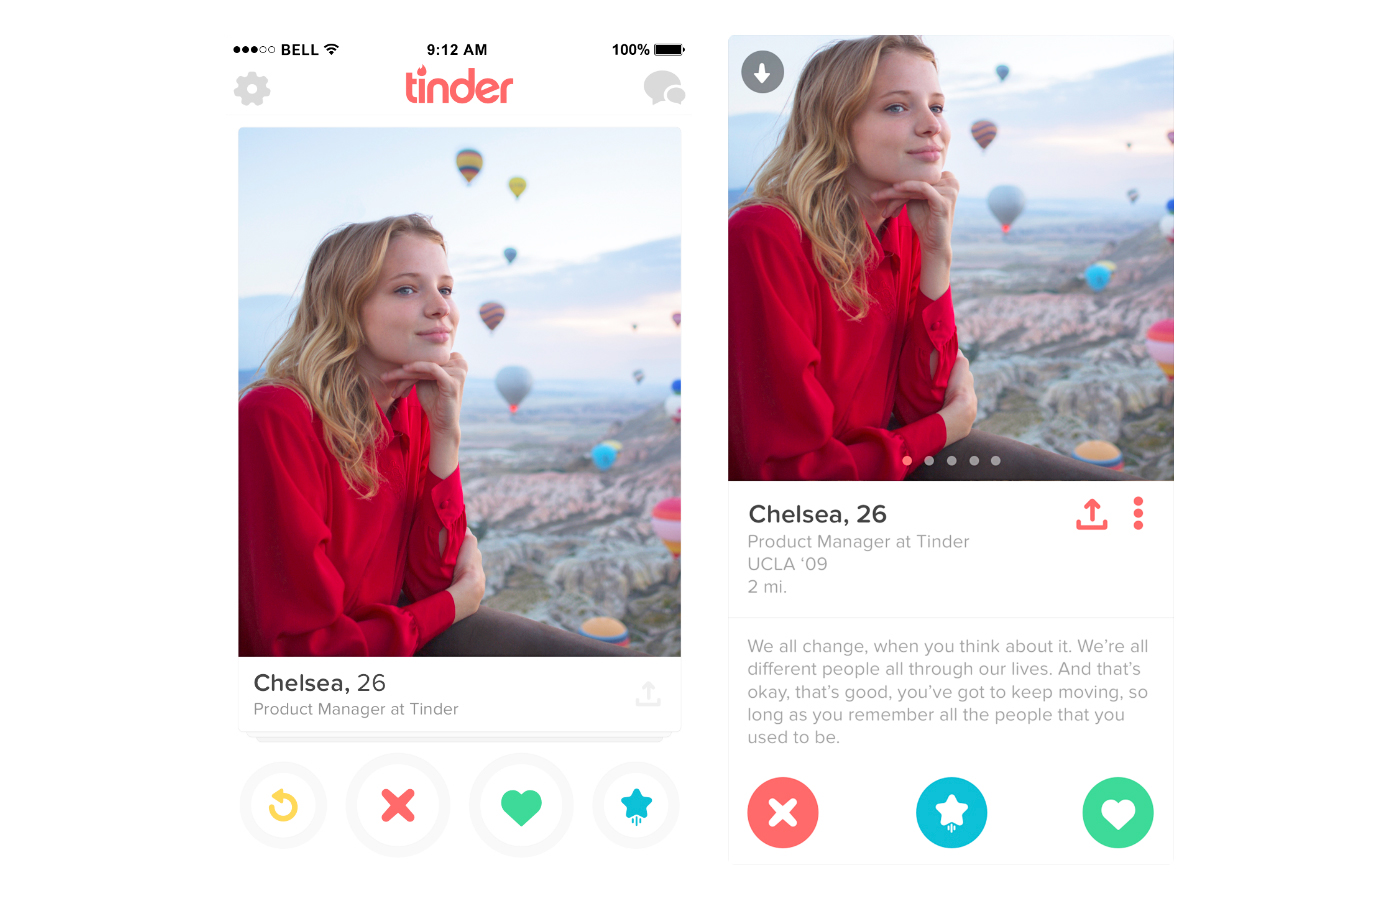 Tinder users can now play matchmakers for their friends